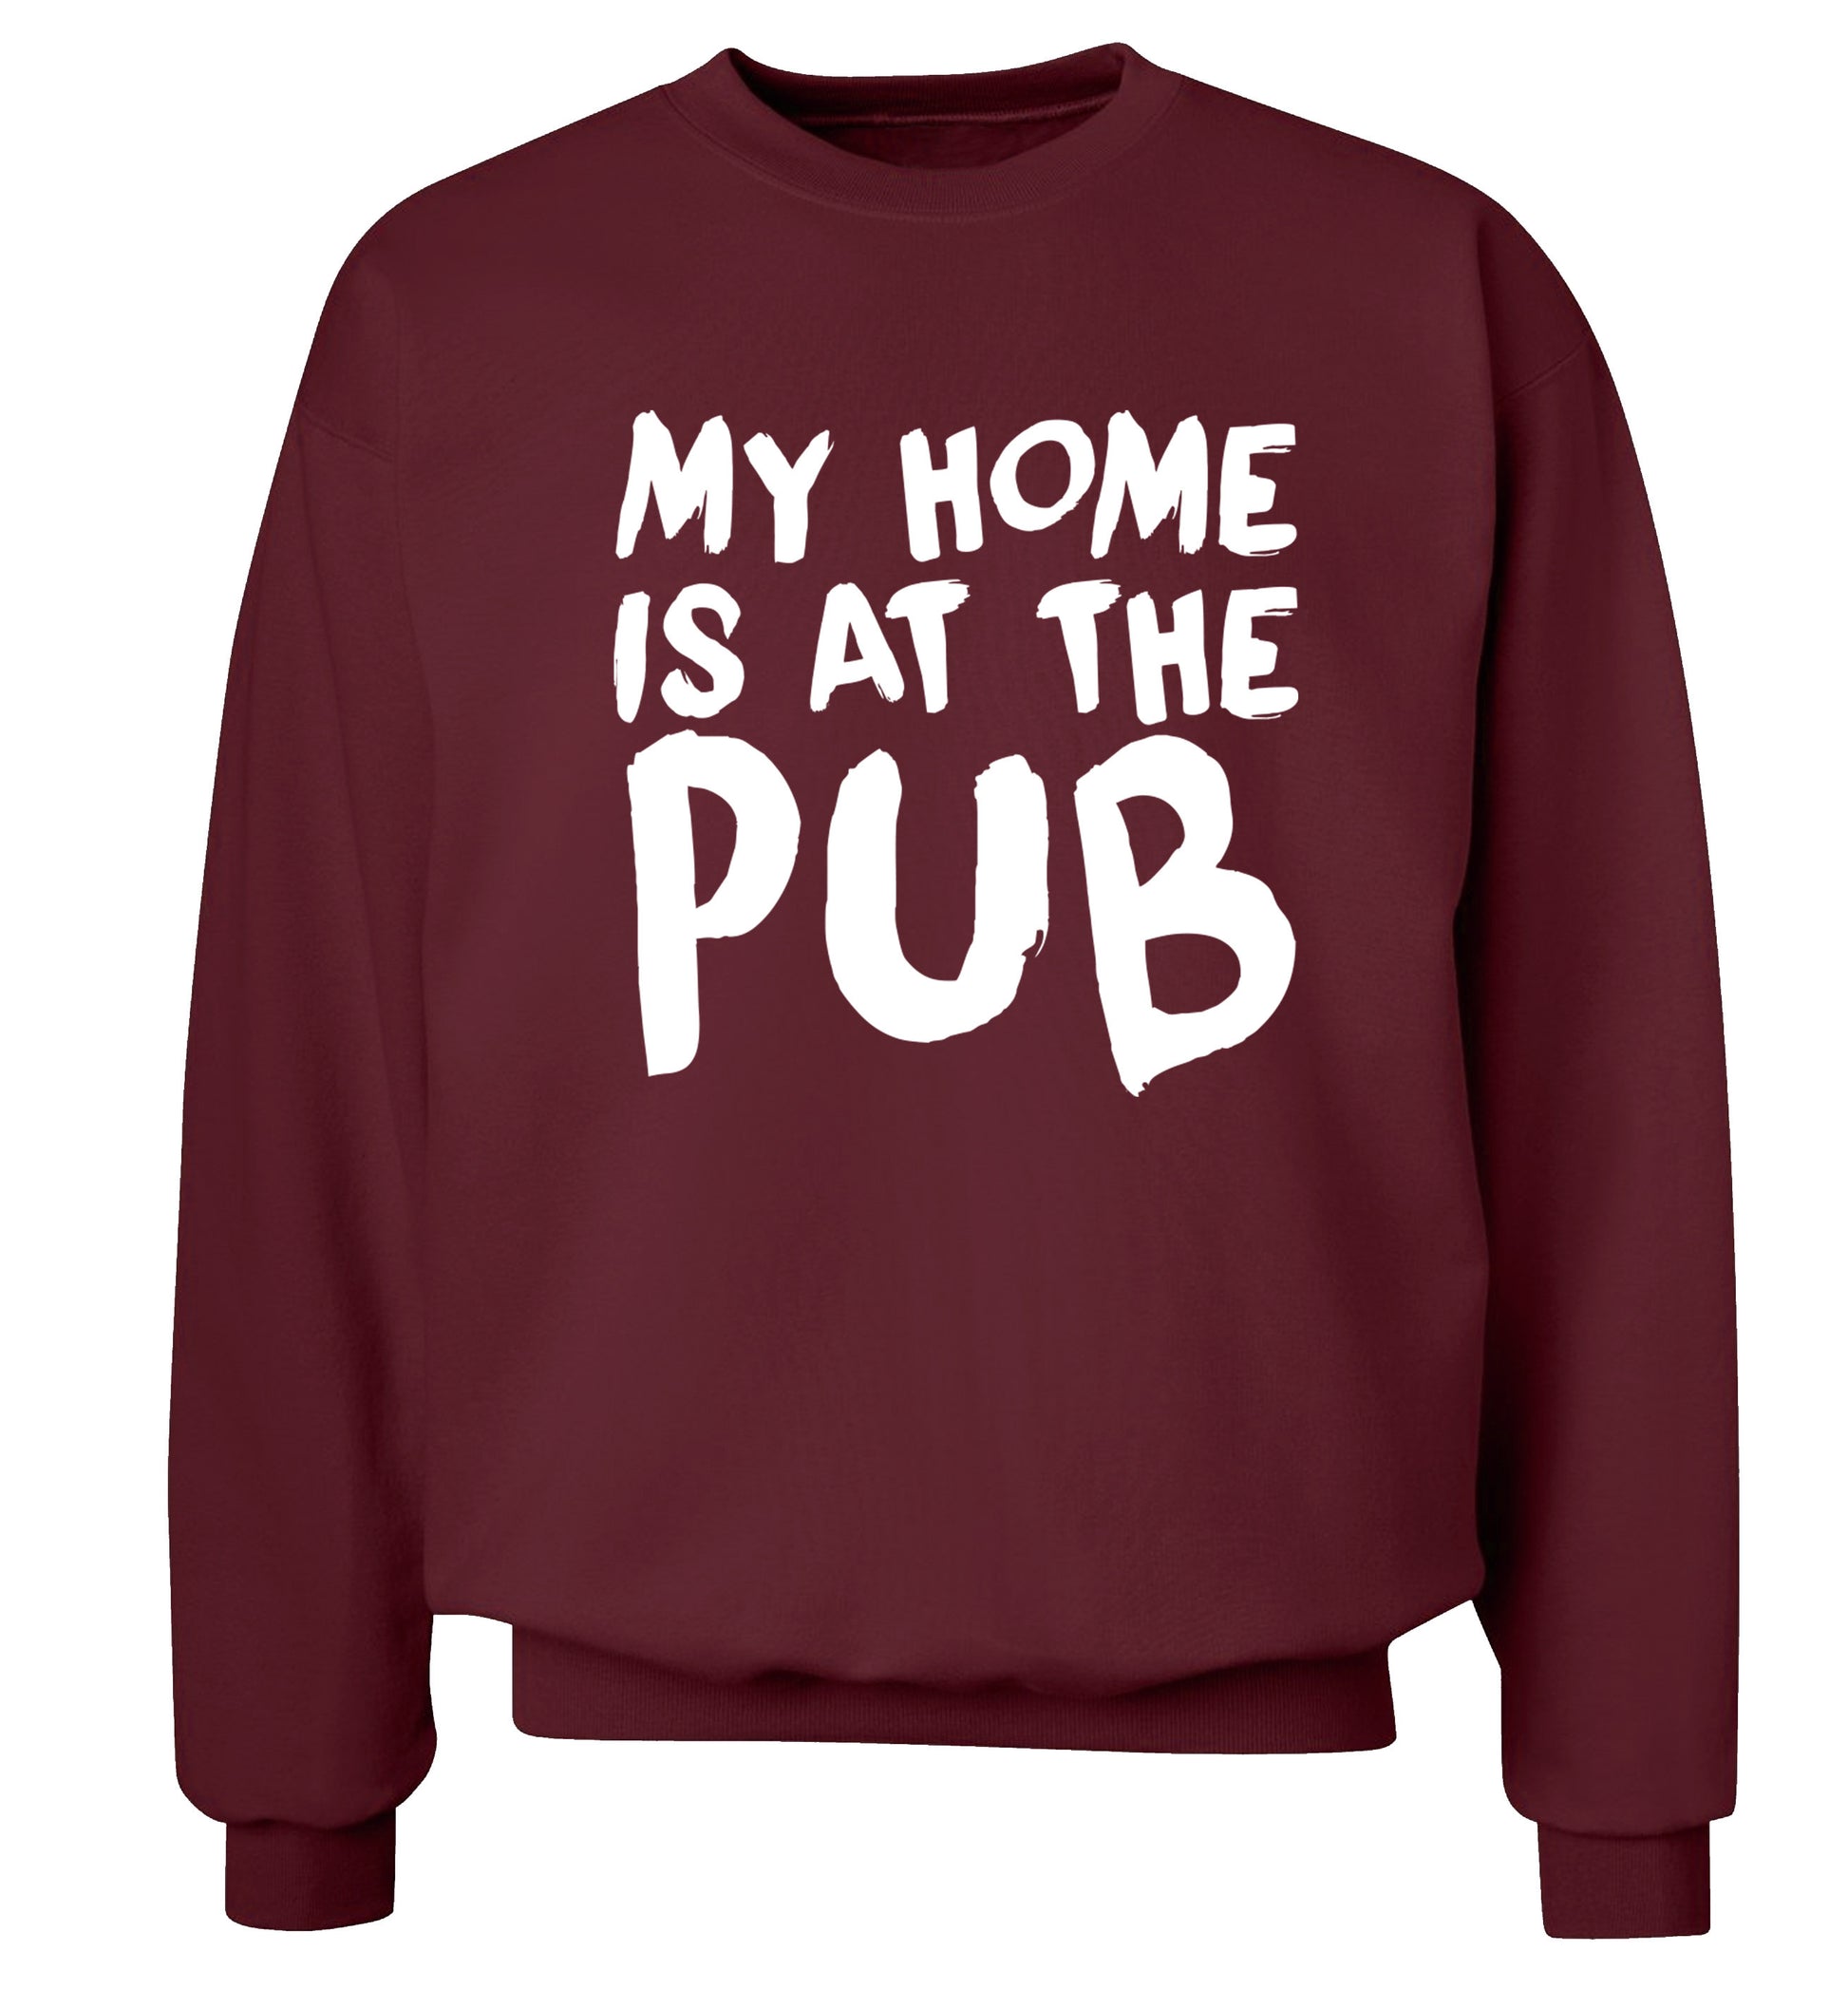 My home is at the pub Adult's unisex maroon Sweater 2XL